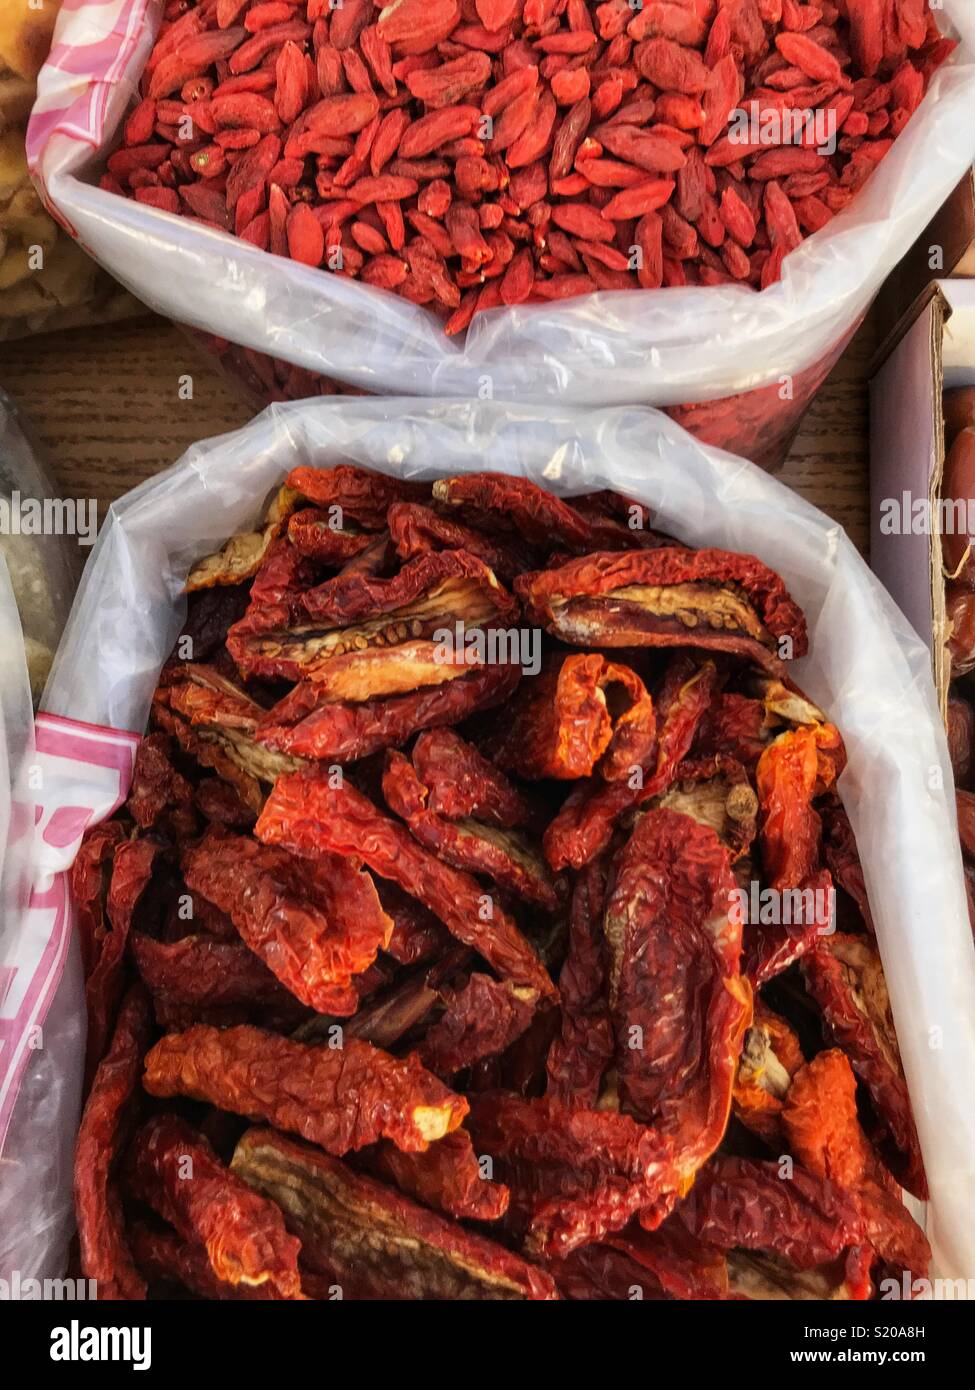 Dried fruits stall, including goji berries and sun dried tomatoes, at an outdoor market in Javea, Spain. Stock Photo